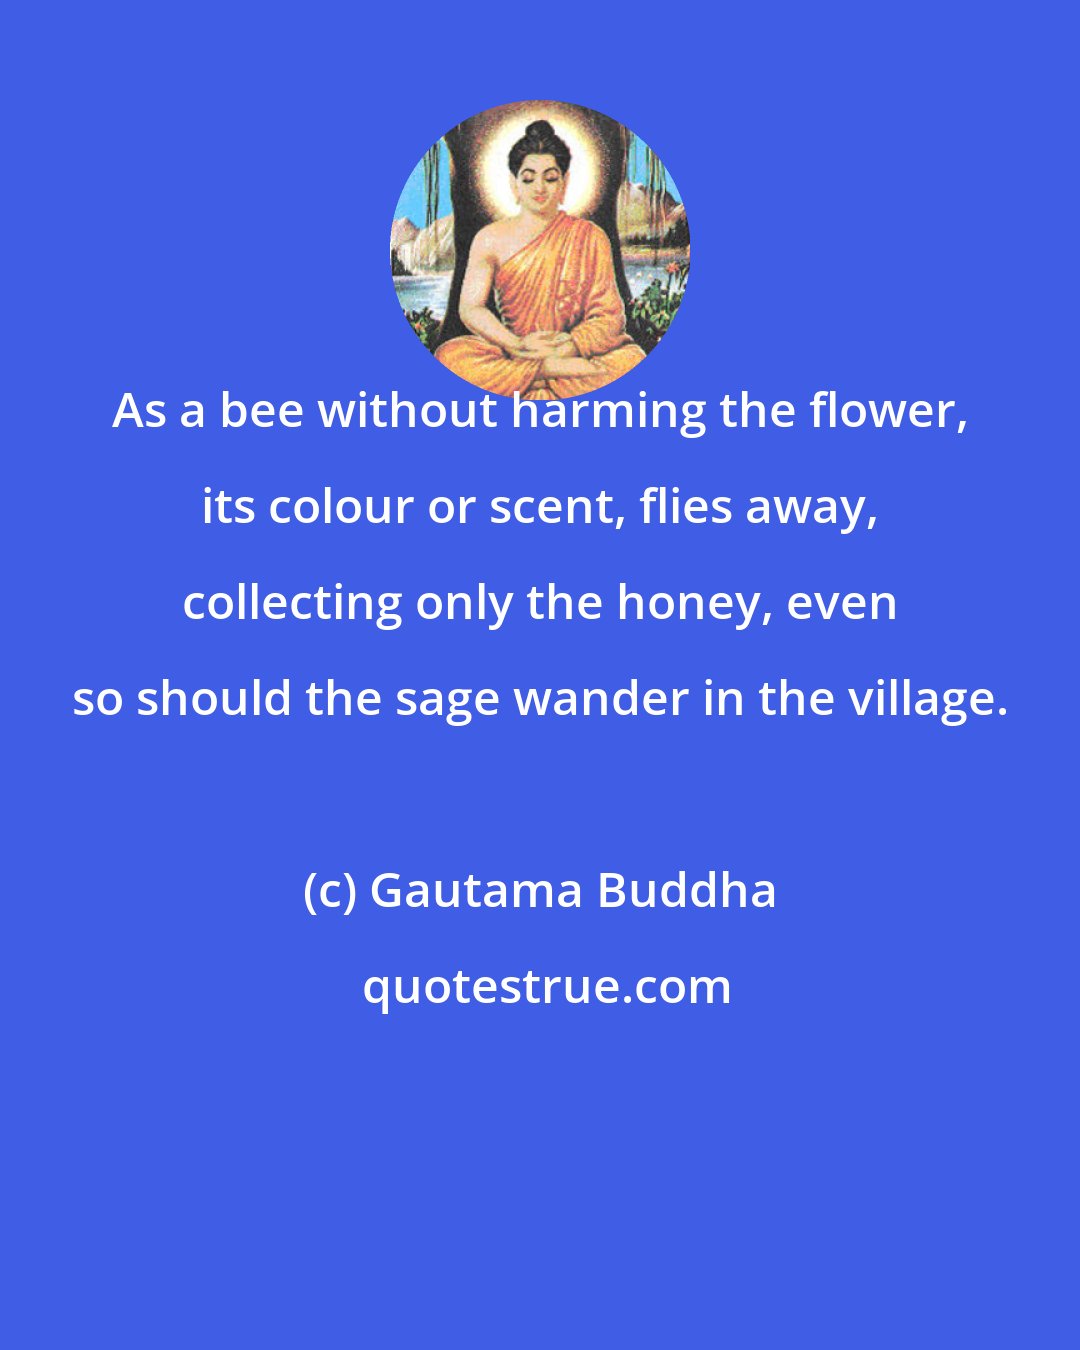 Gautama Buddha: As a bee without harming the flower, its colour or scent, flies away, collecting only the honey, even so should the sage wander in the village.